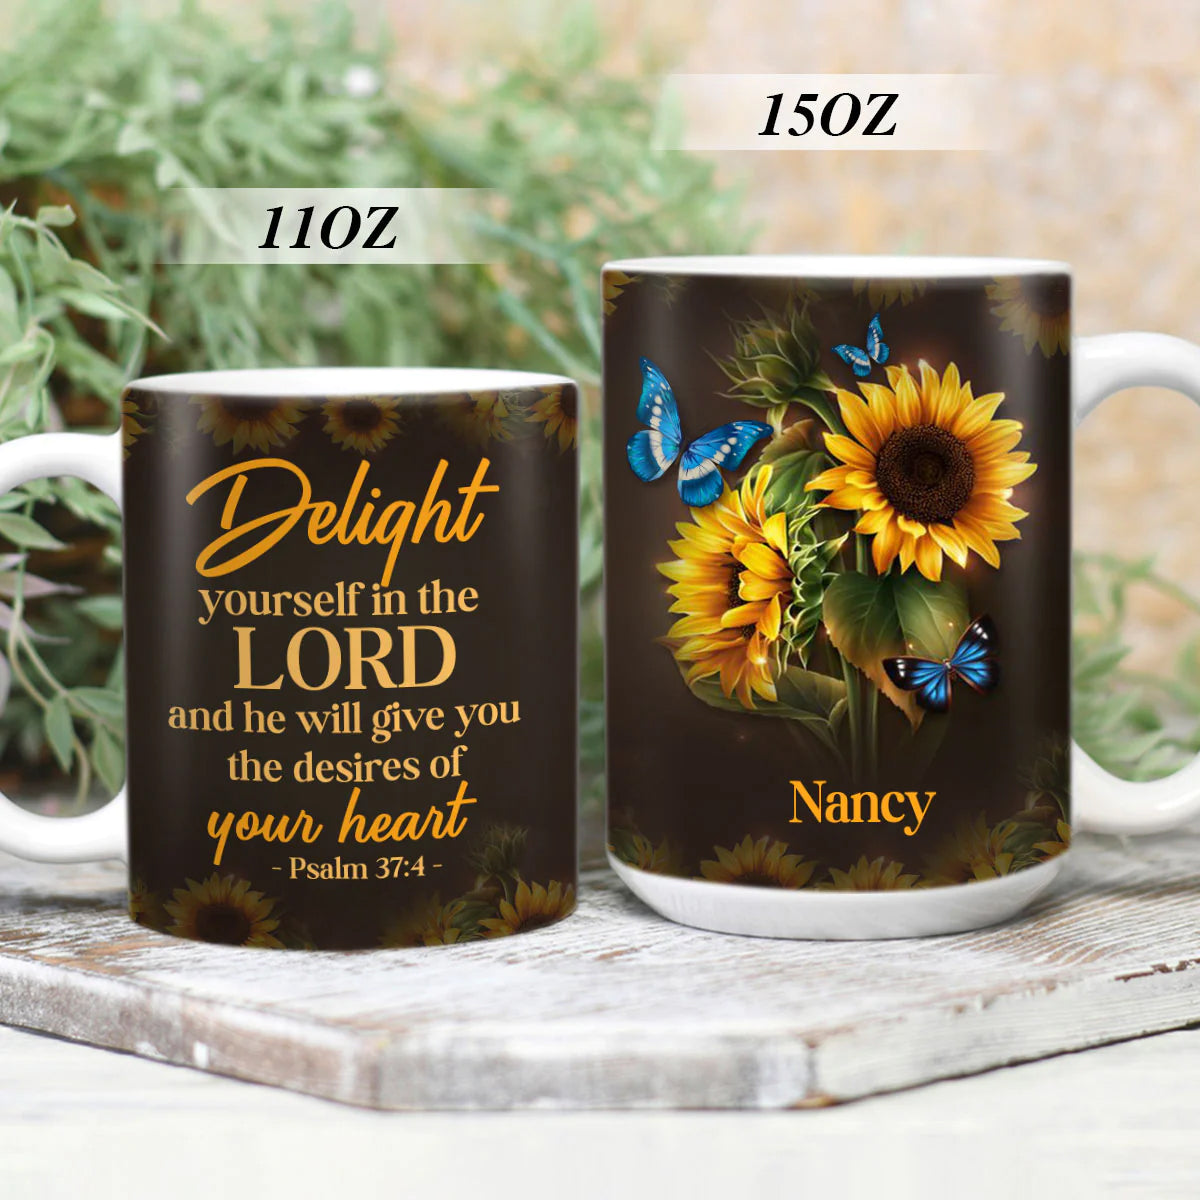 Christianartbag Drinkware, Delight Yourself In The Lord, Personalized Mug, Tumbler, Personalized Gift. - Christian Art Bag